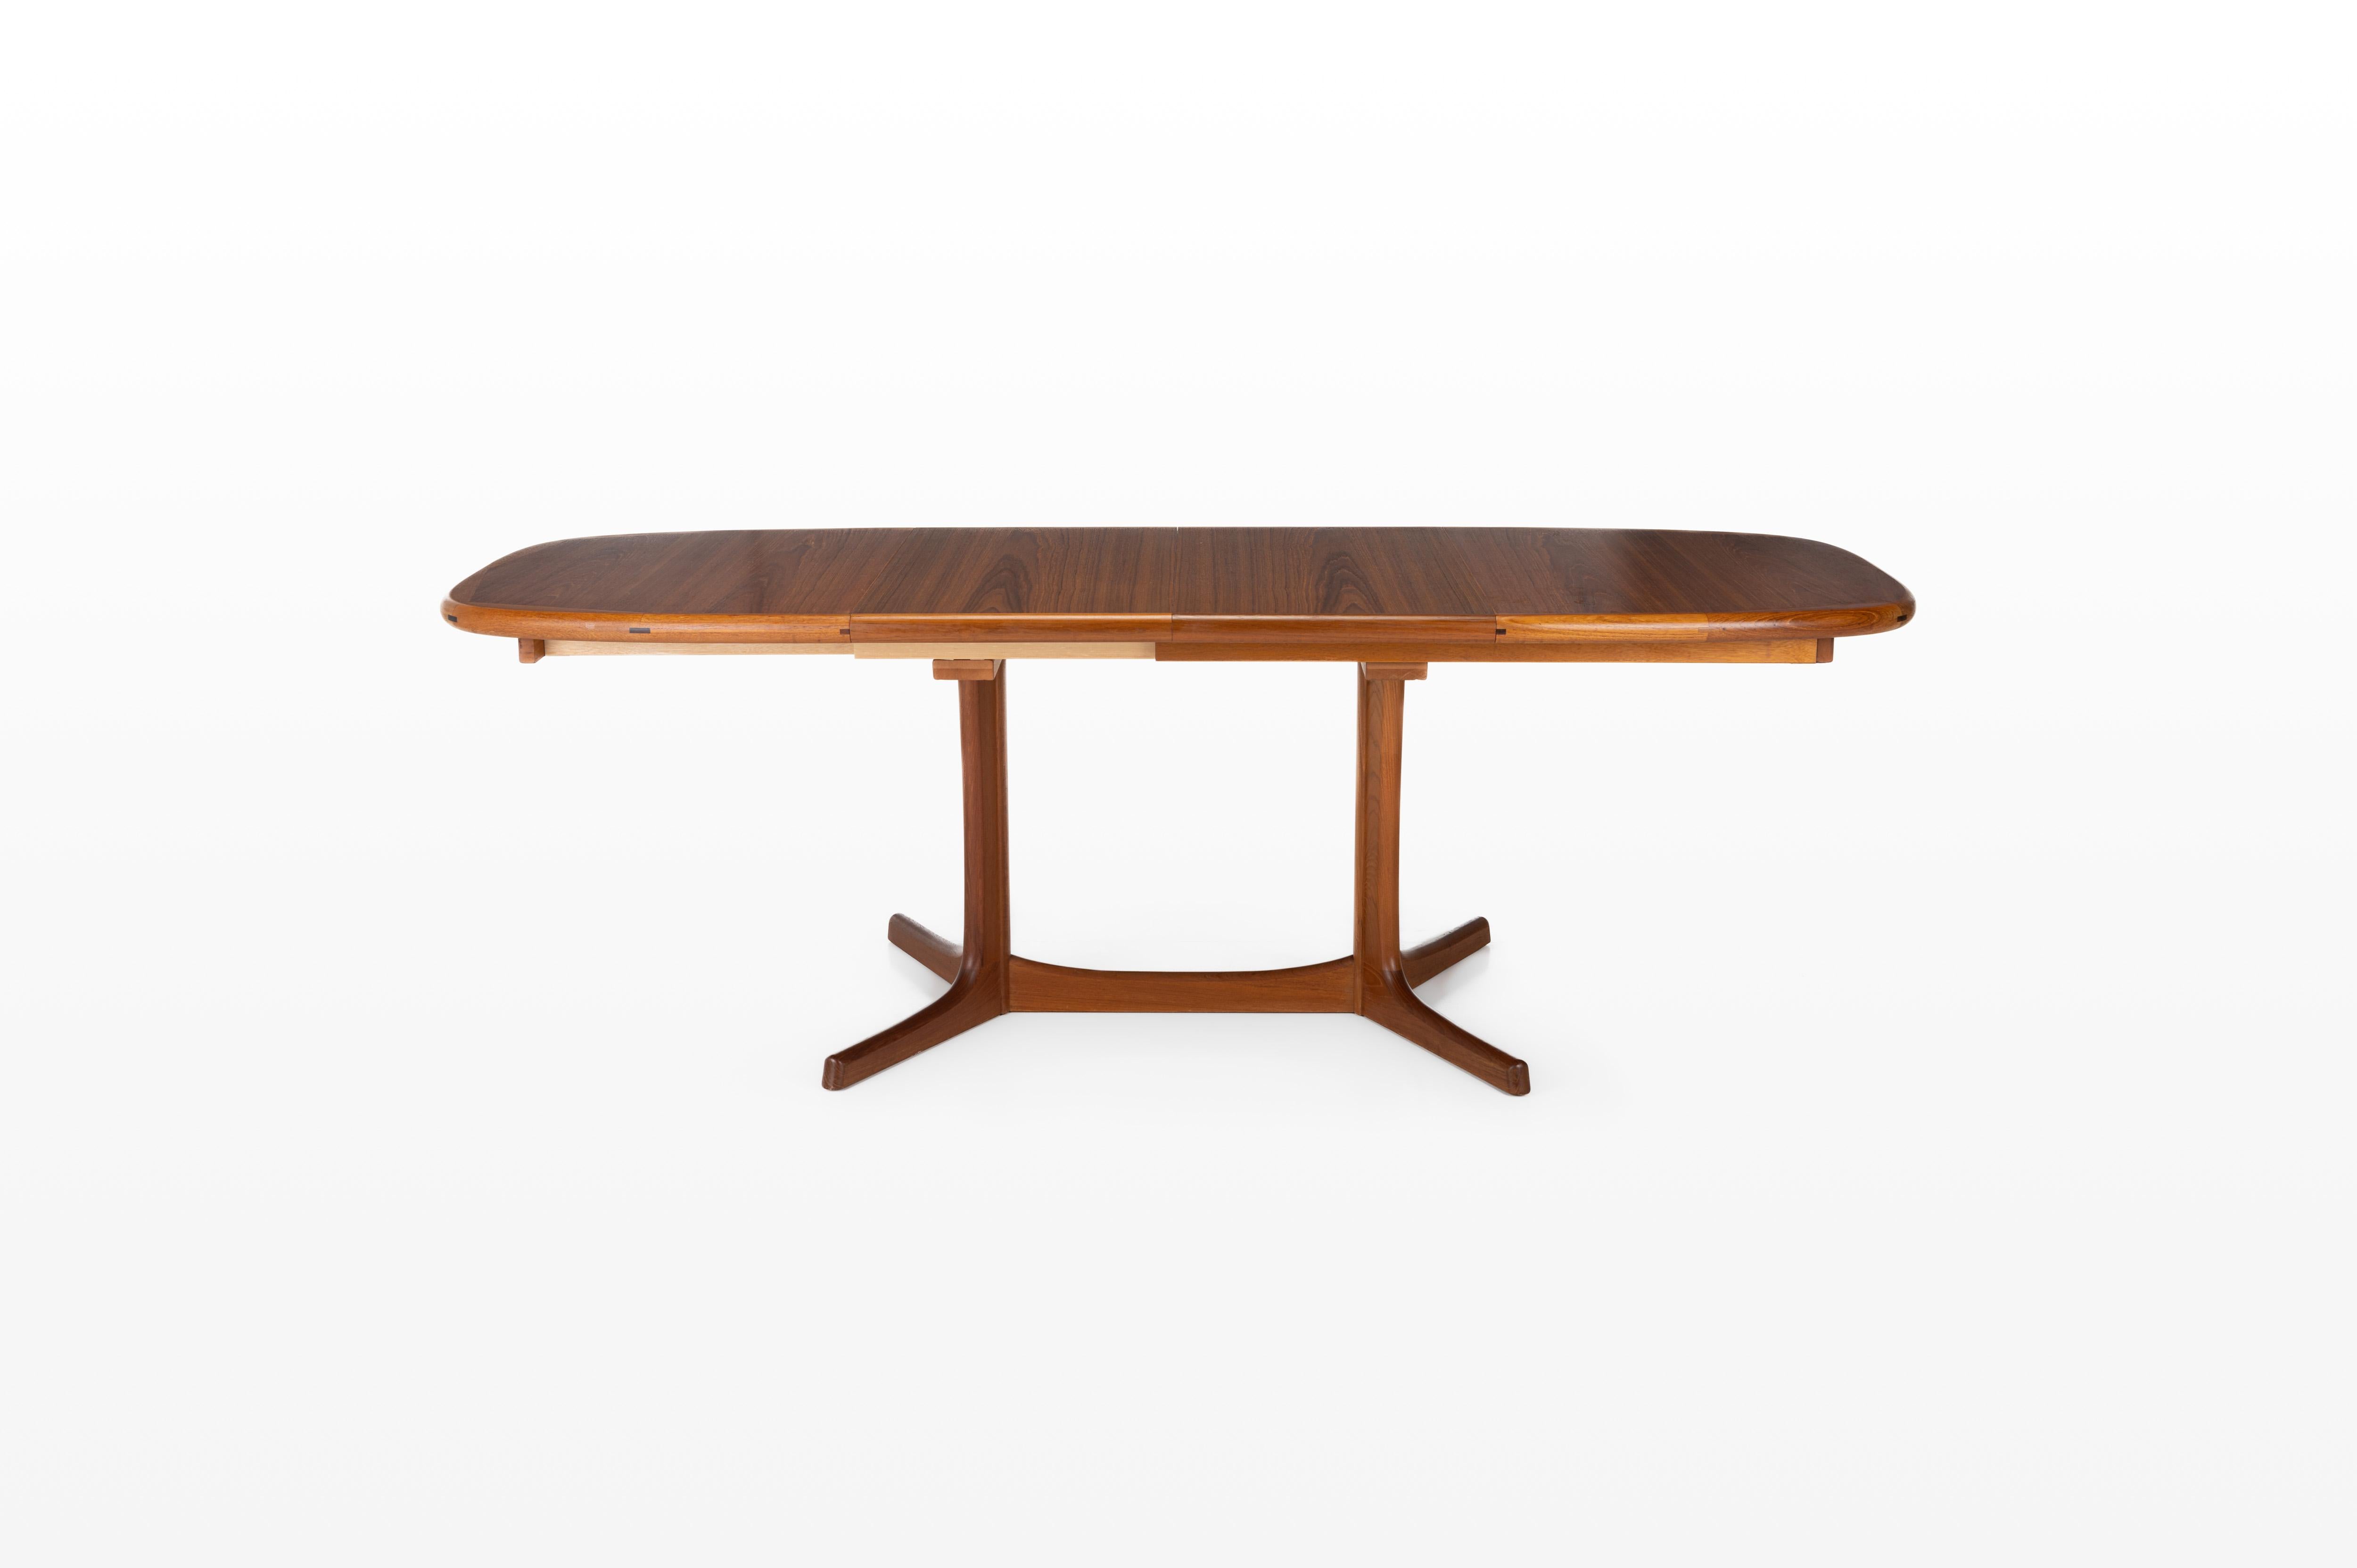 Scandinavian Modern Oval Extendable Dining Table in Teak from Dyrlund, 1970s